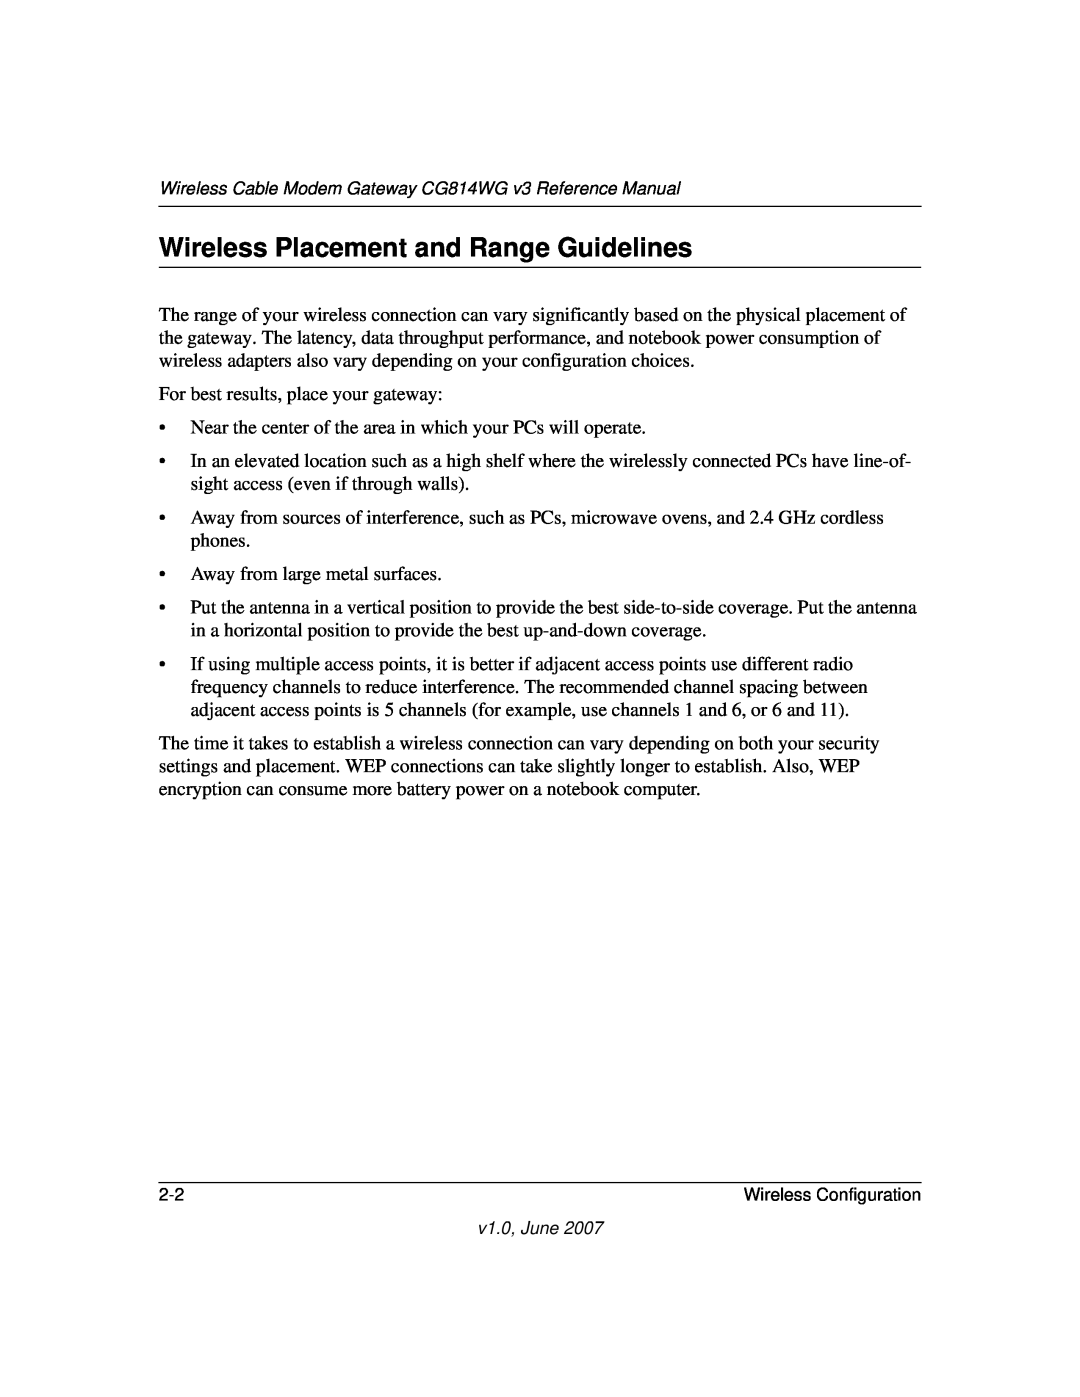 NETGEAR CG814WG V3 manual Wireless Placement and Range Guidelines 